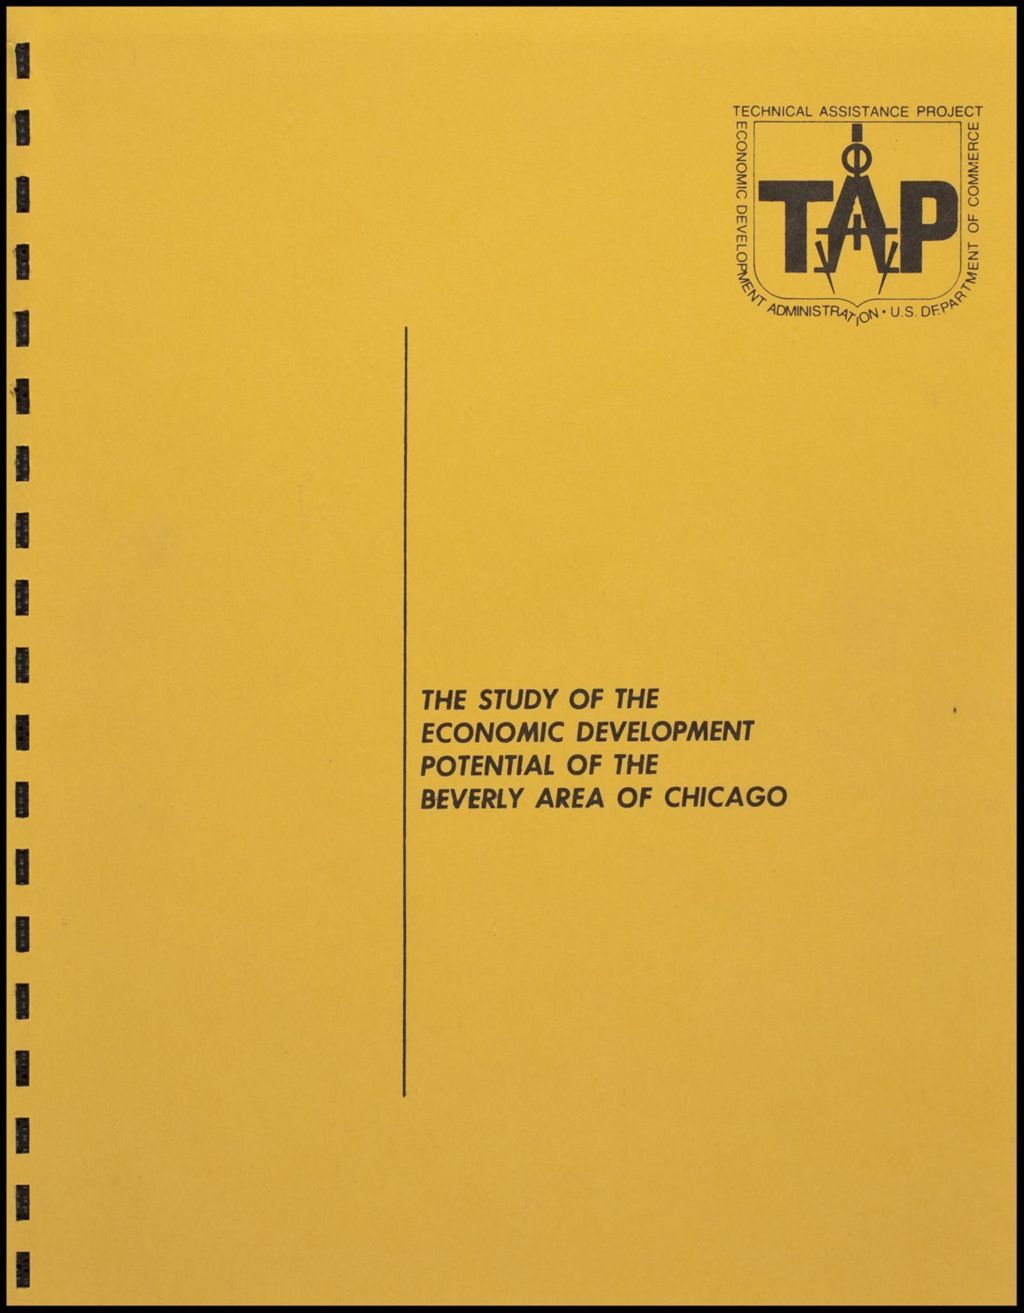 Publications - 'The Study of the Economic Development Potential of the Beverly Area of Chicago' (Folder 165)